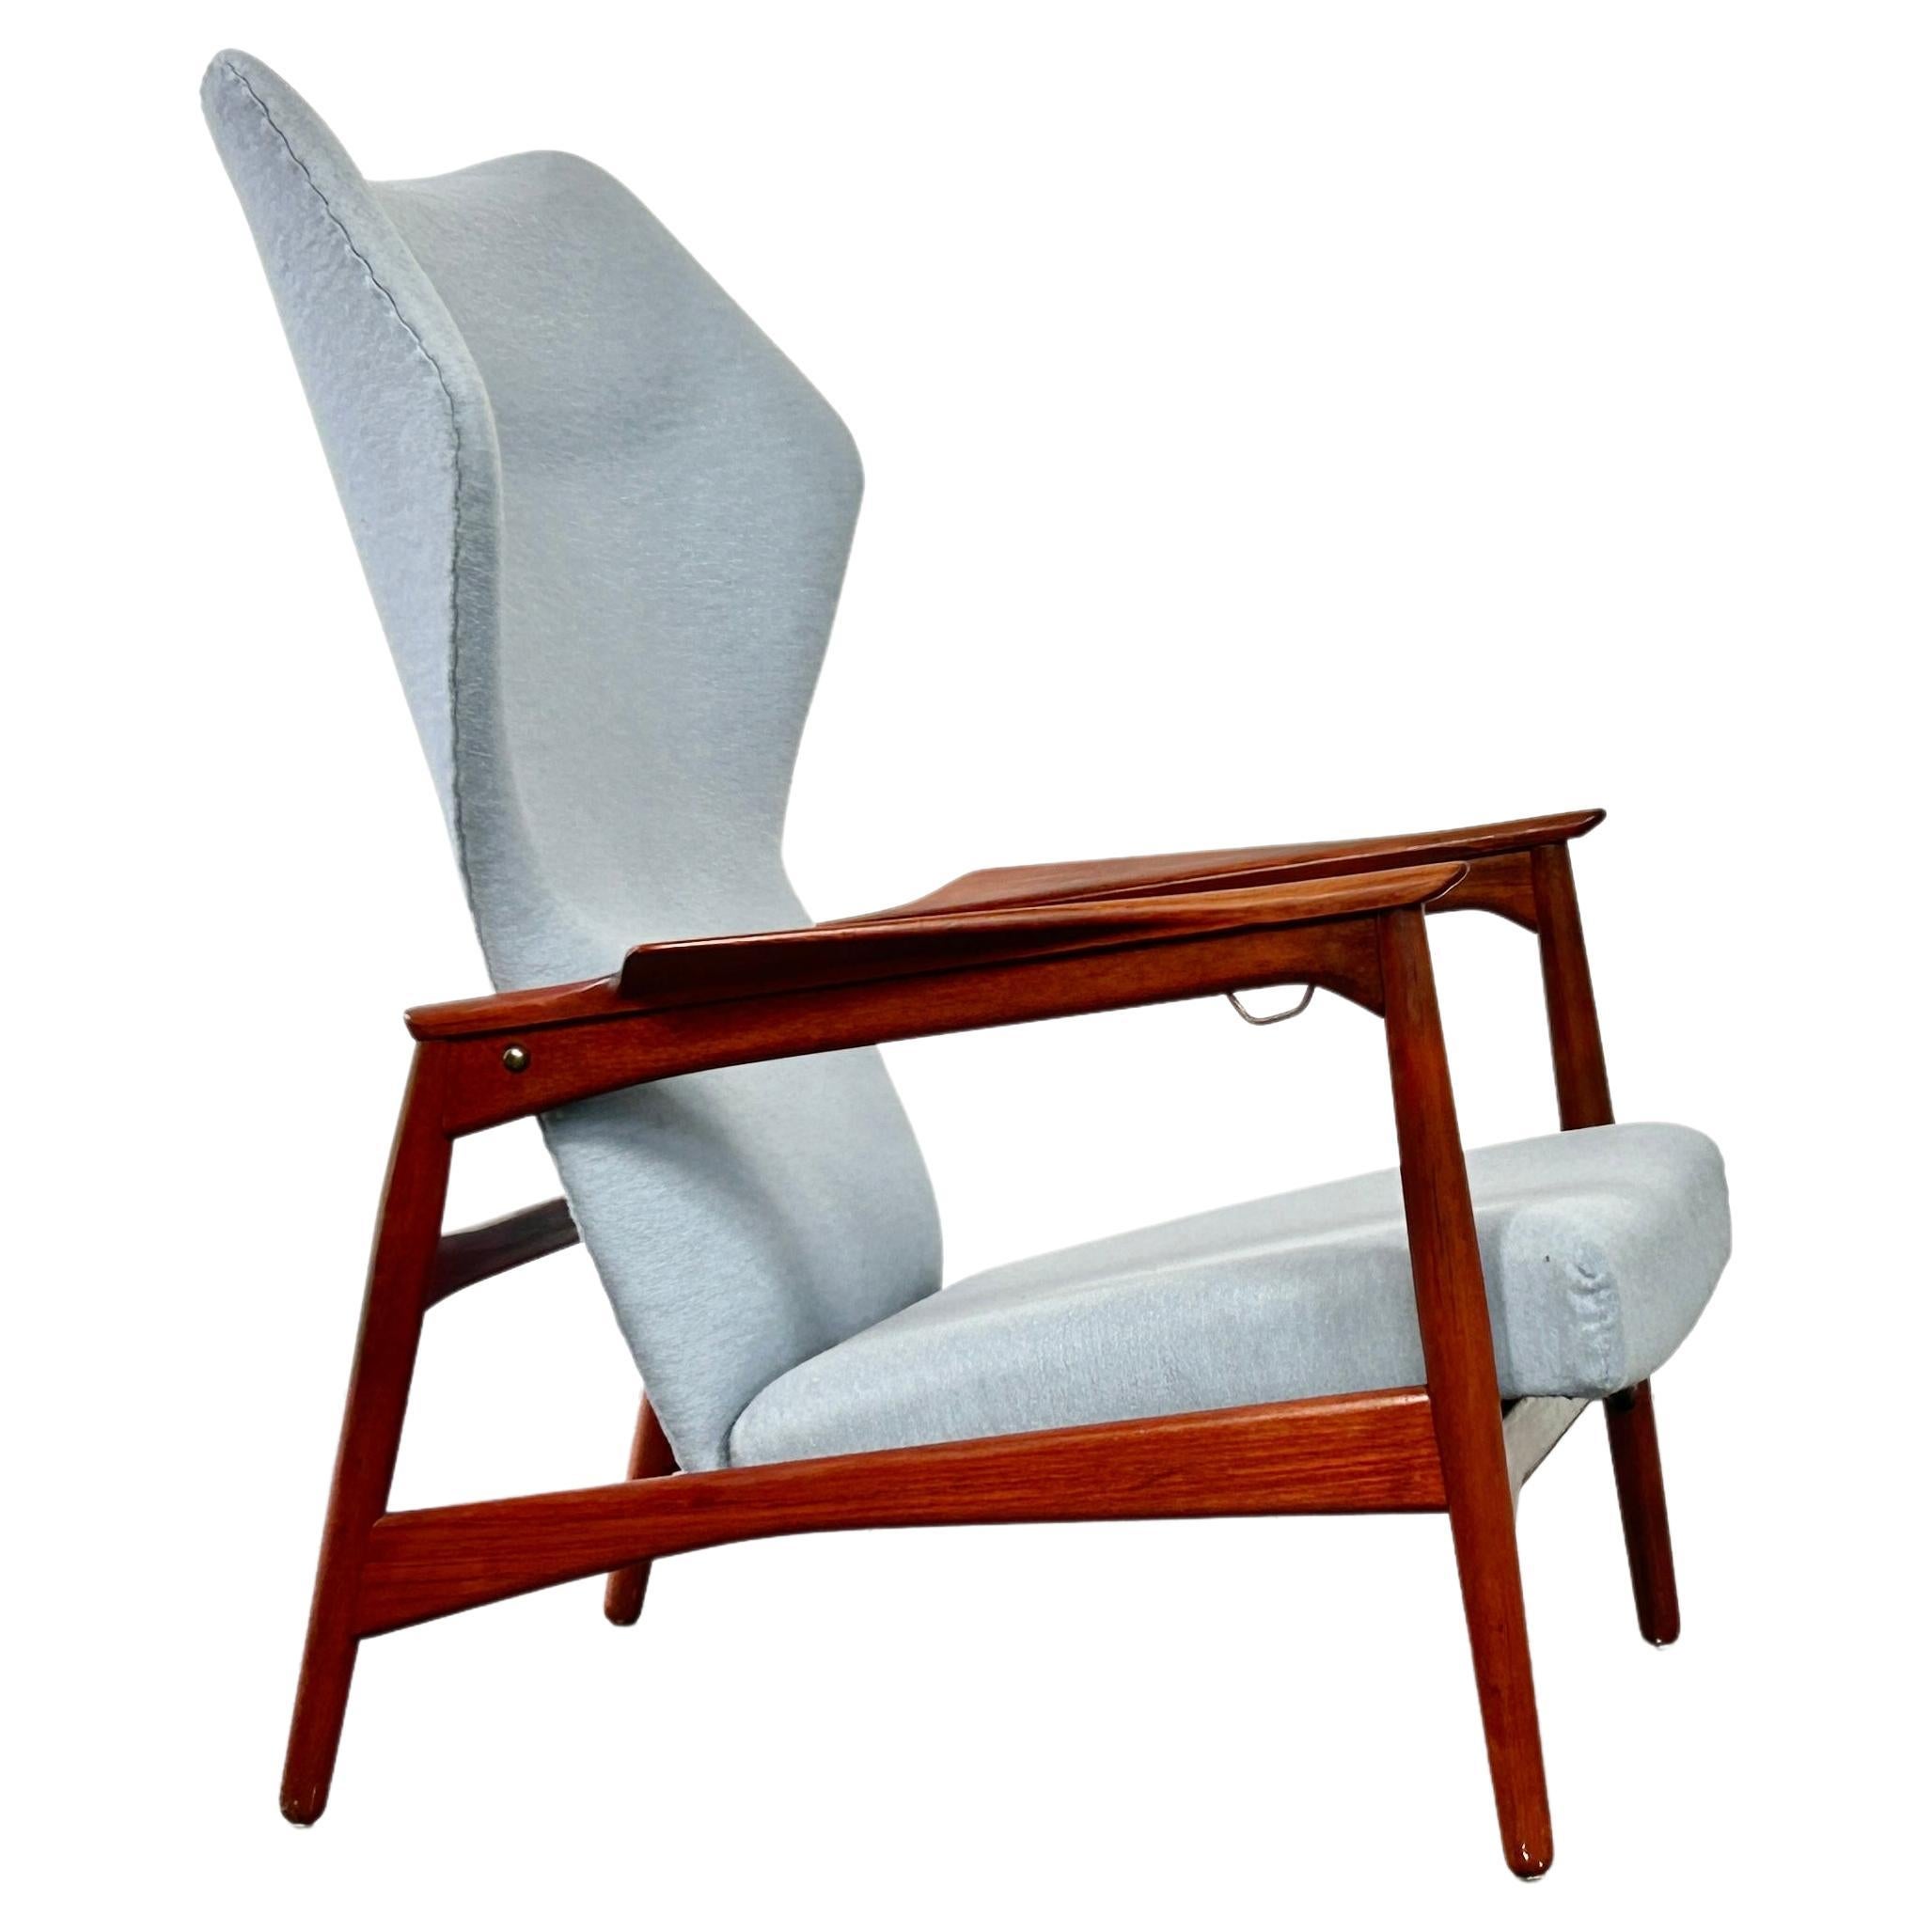 Carlo Wingback Lounge Chair designed by Ib Kofod Larsen 1954 For Sale